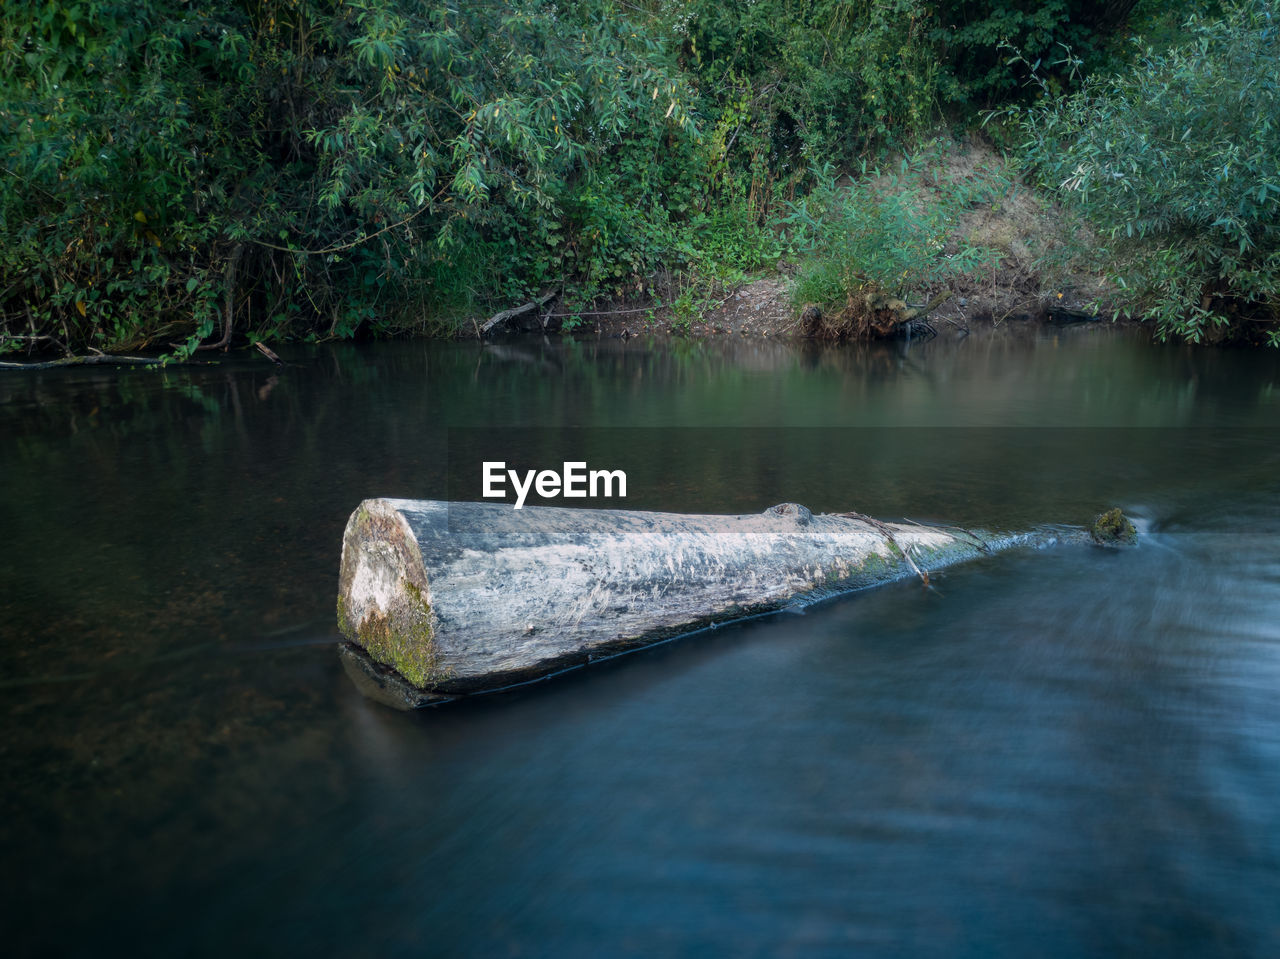 Tree stump in shallow river with fast current against shore overgrown with grass during dusk.